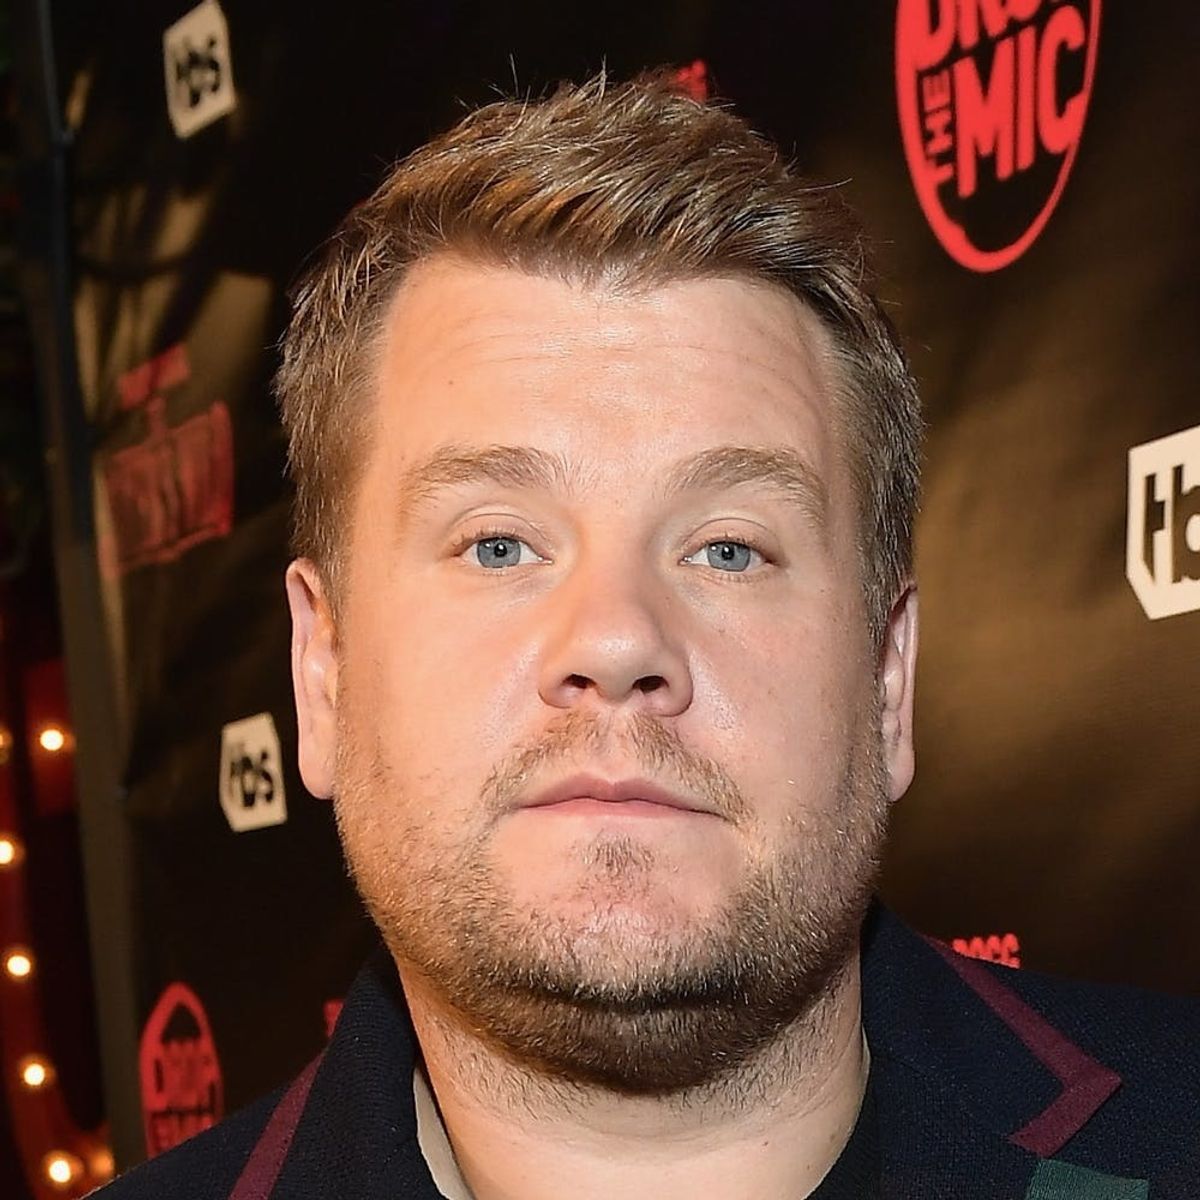 James Corden Is Apologizing for Jokes He Made About the Harvey Weinstein Scandal